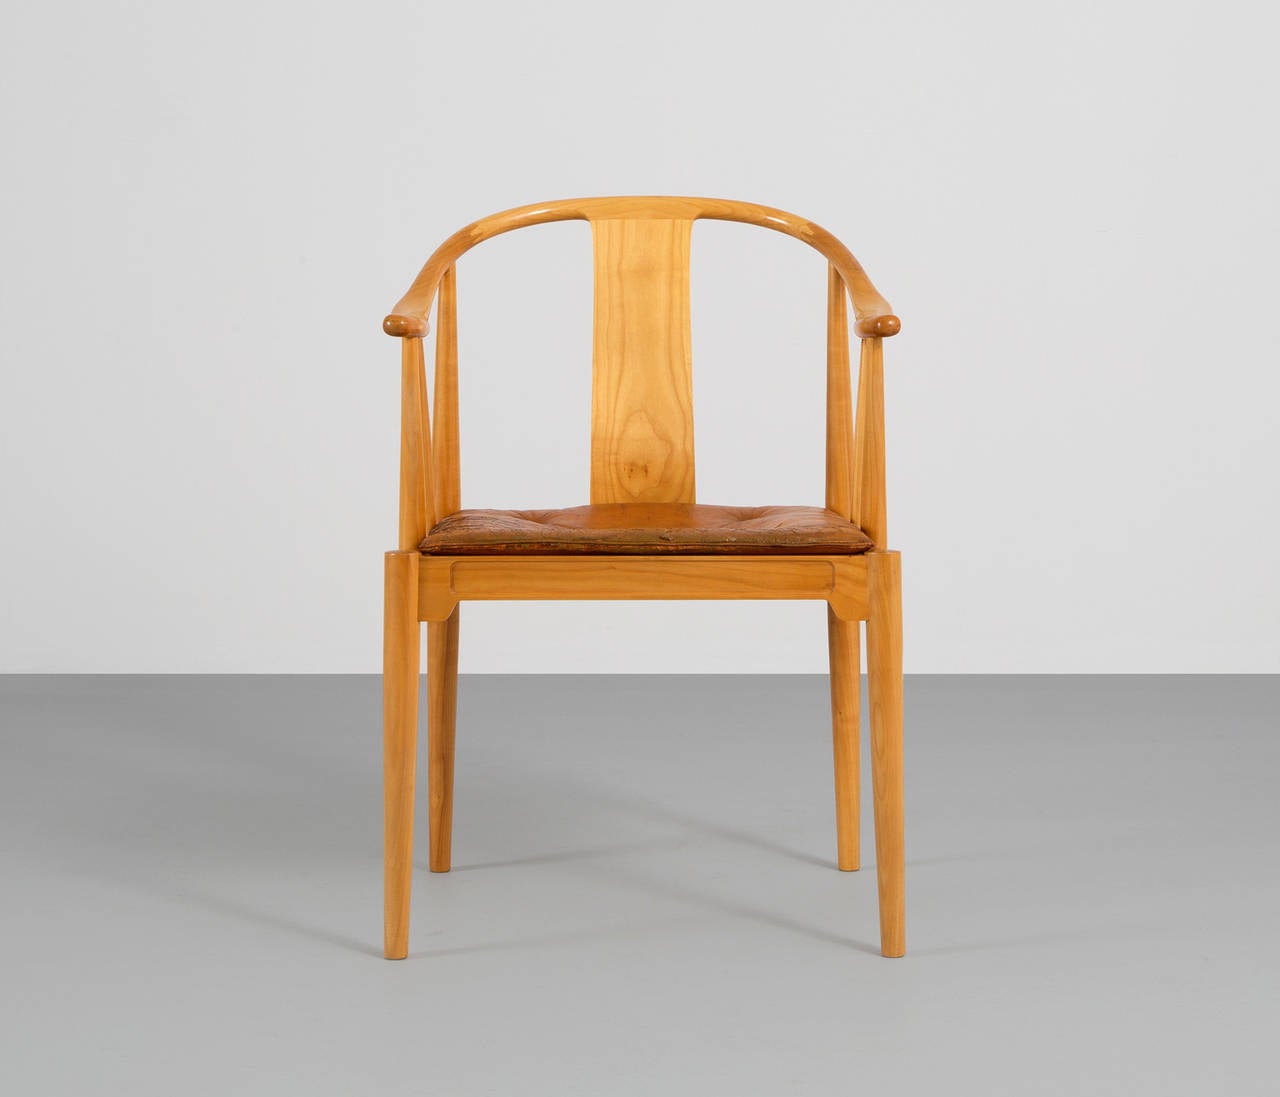 Early China chair by Hans Wegner for Fritz Hansen.

This version is made from solid ash wood and is accompanied with the original cognac colored seat-cushion.

Hans Wegner was cabinet-maker and furniture designer and one of the principals of